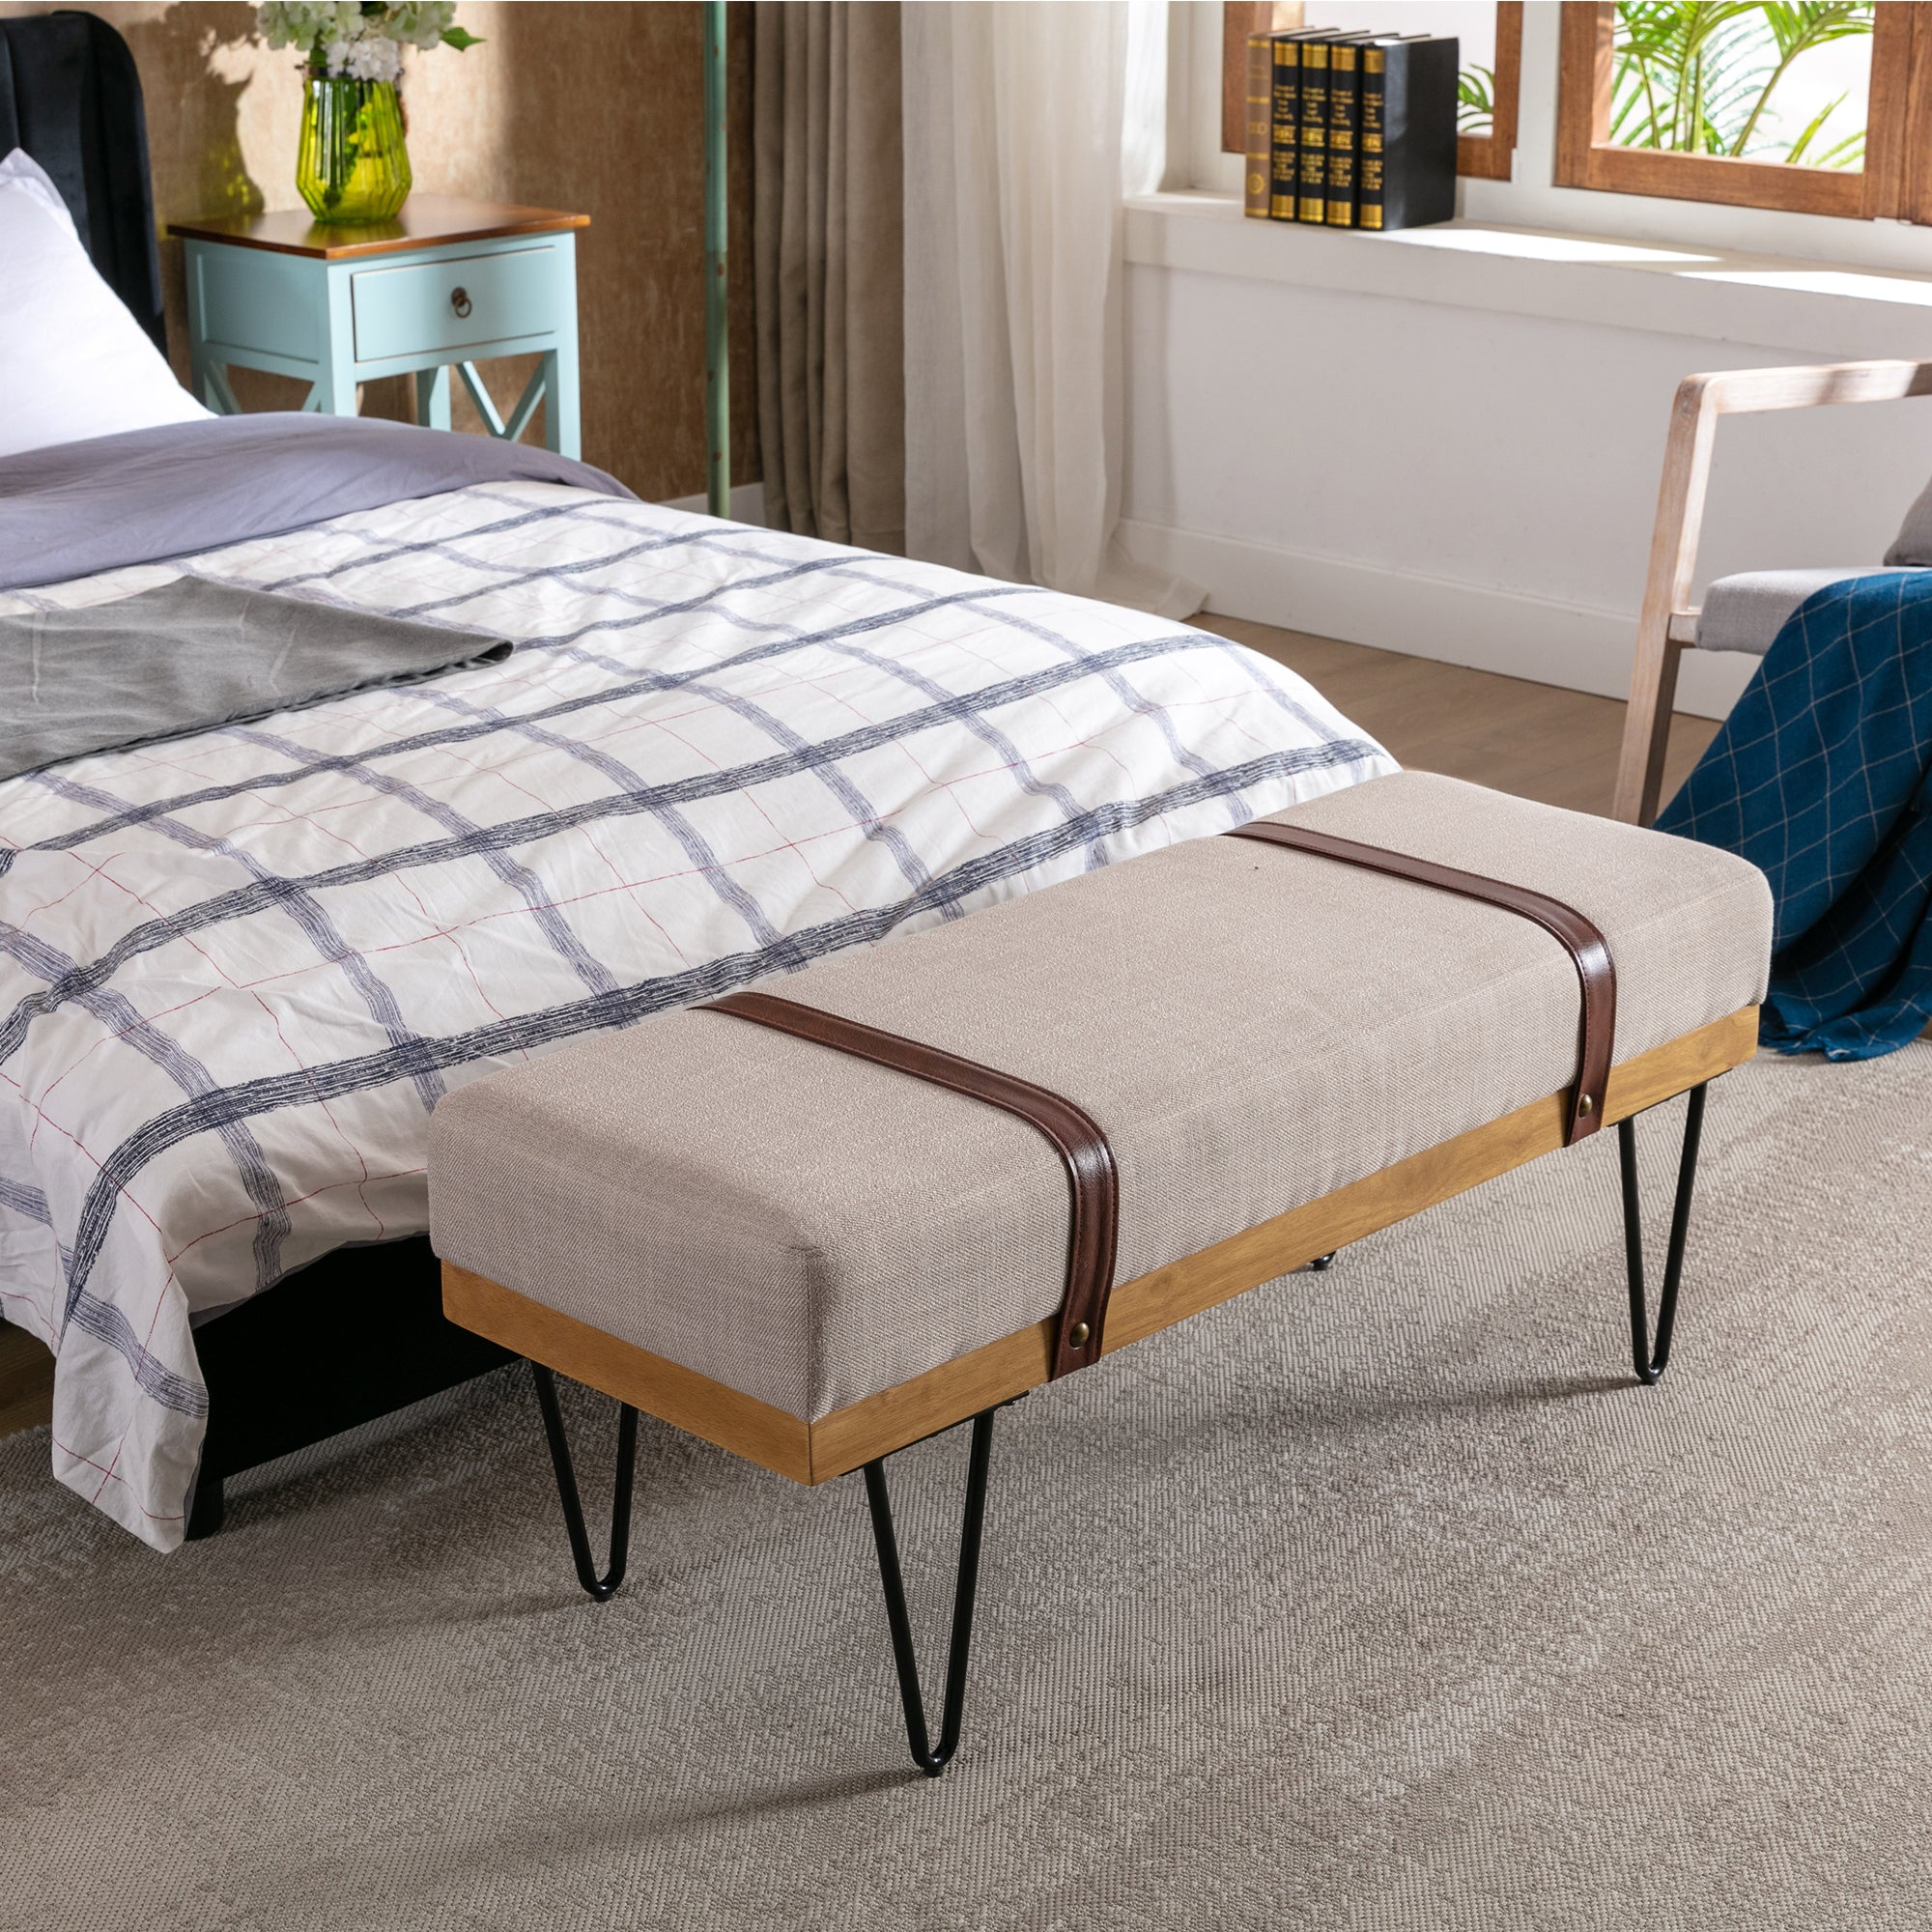 Linen Fabric soft cushion wood frame Rectangle bed bench